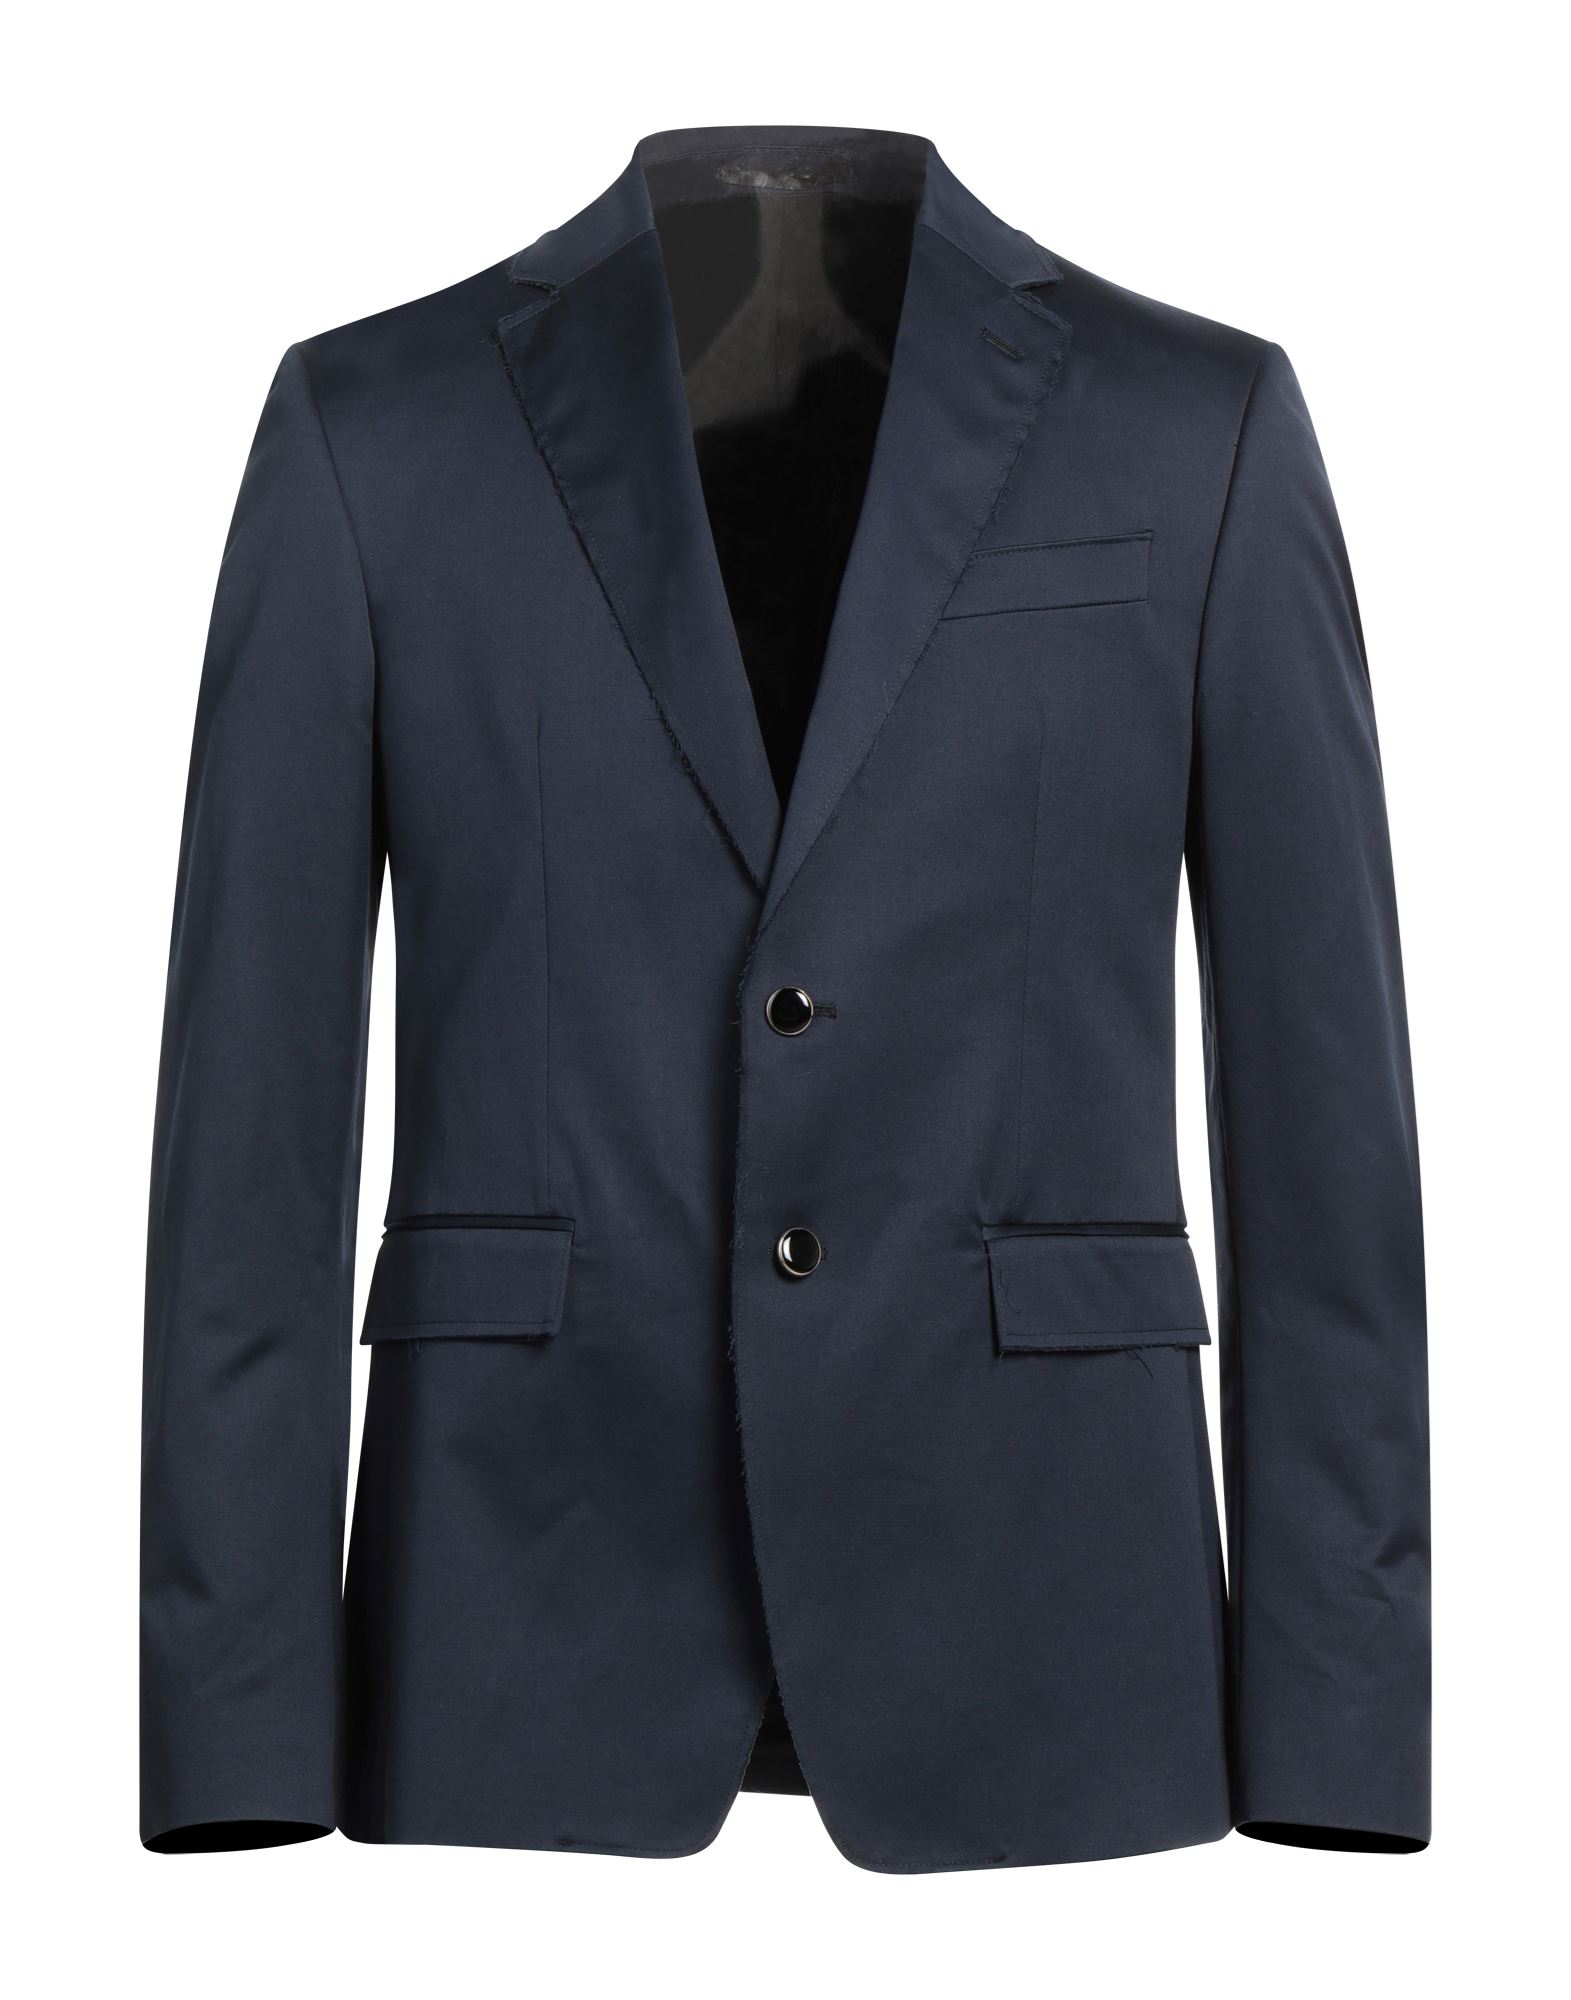 Mauro Grifoni Suit Jackets In Navy Blue